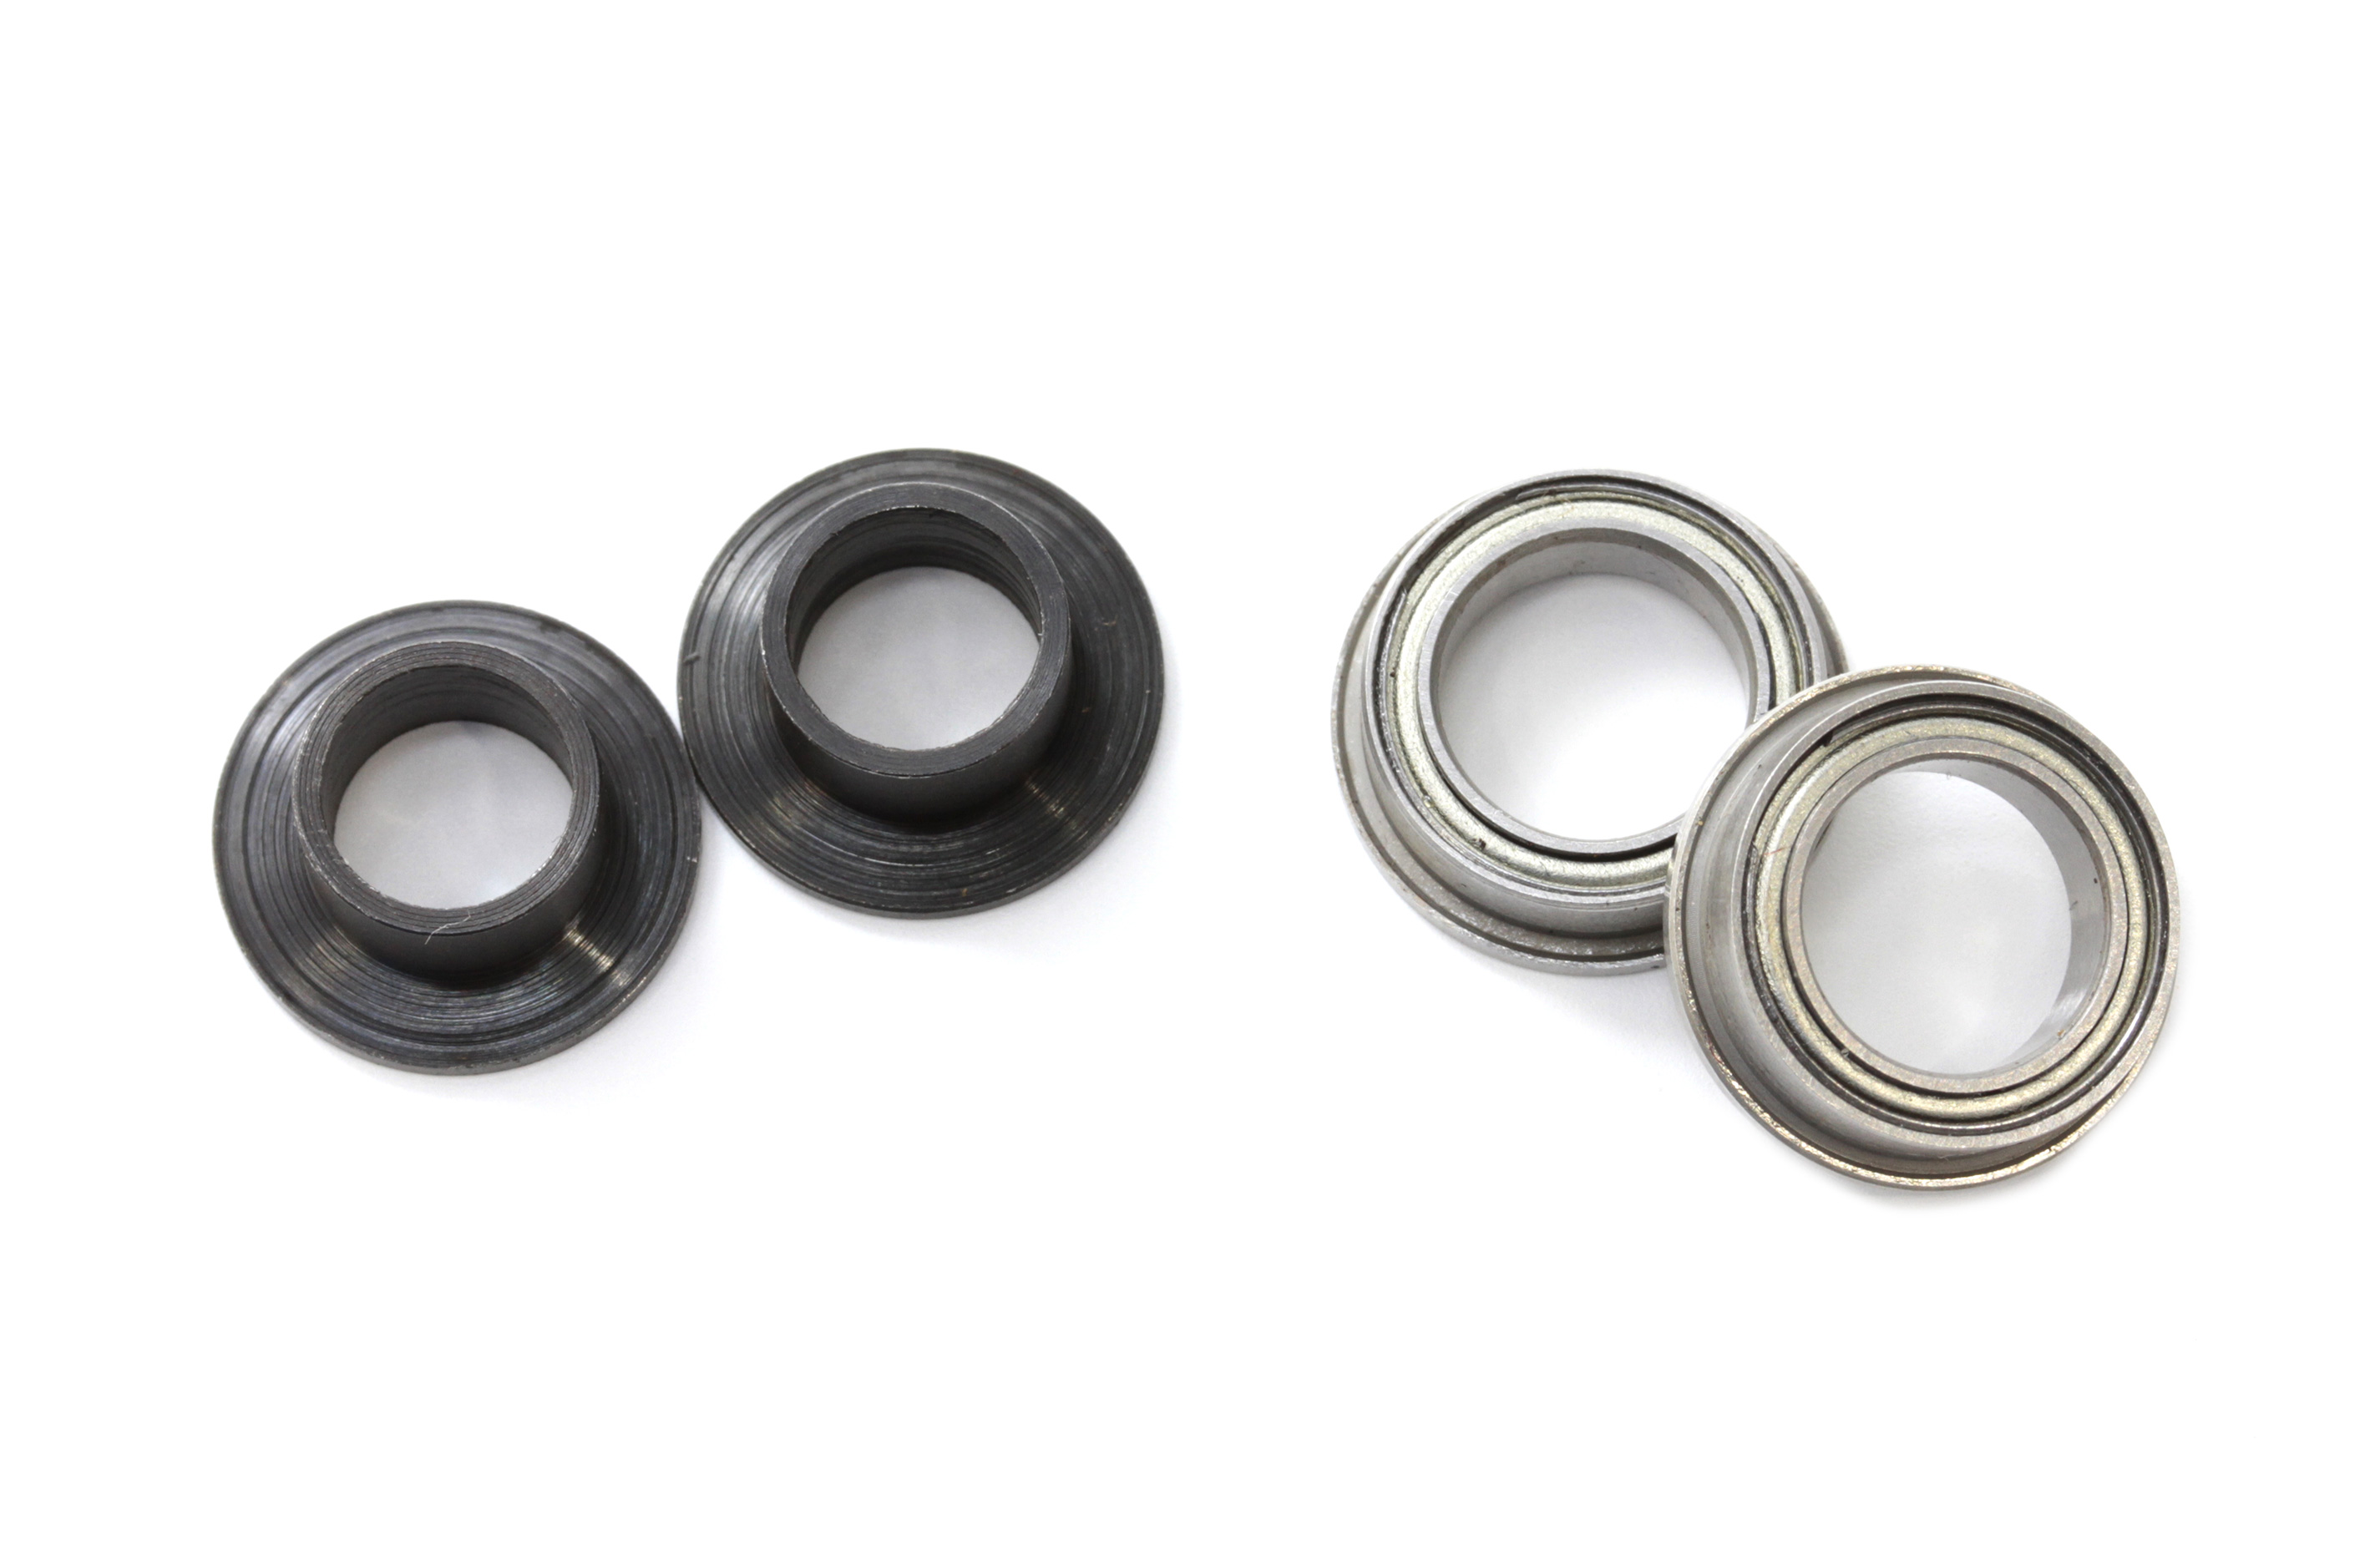 AREA 5T-008/02 Flanged ball bearings and spacers for 5T-008 centerlink